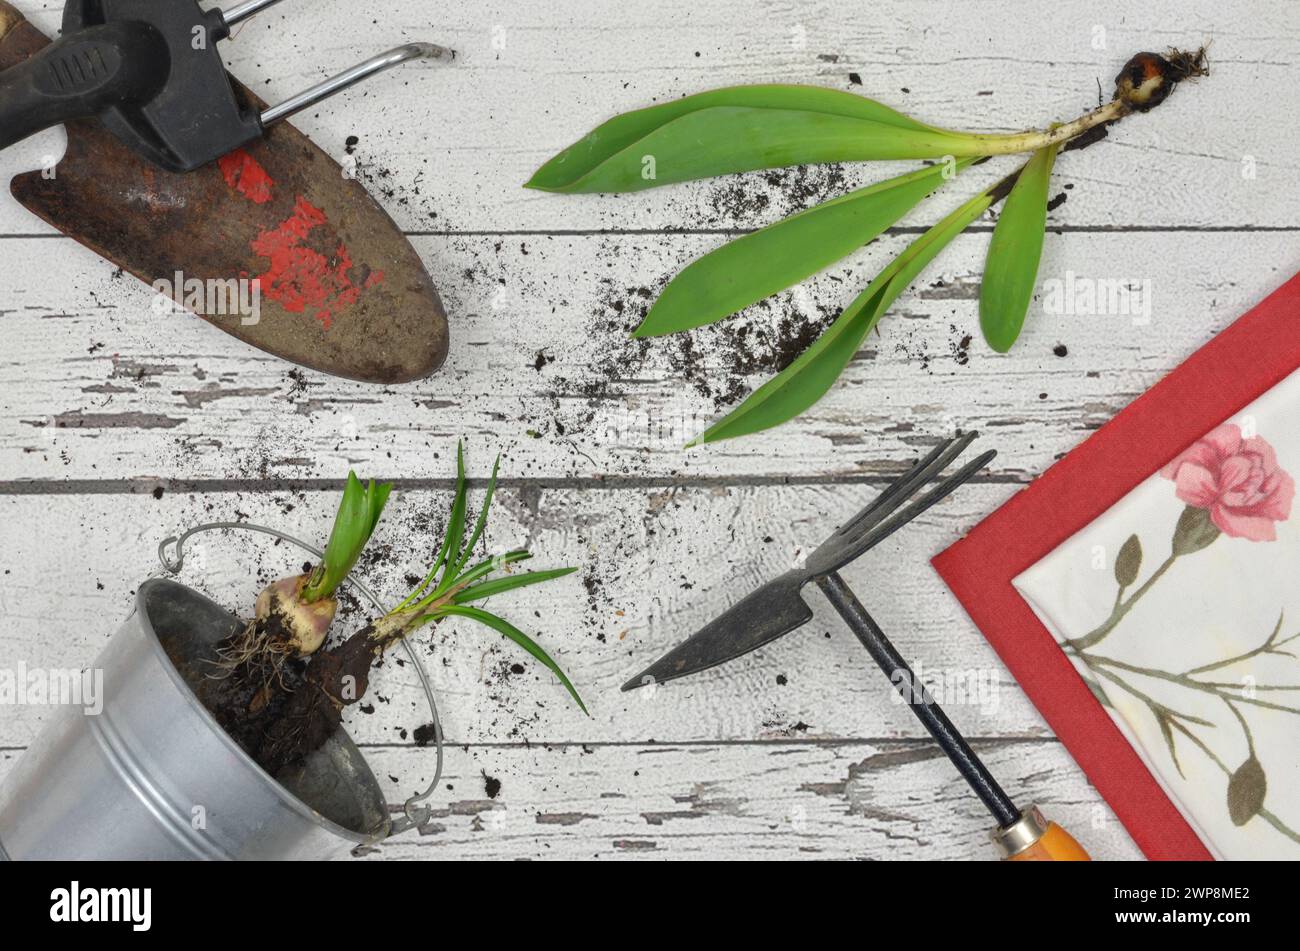 Gardening tools and flower bulbs on white table, top view. Stock Photo